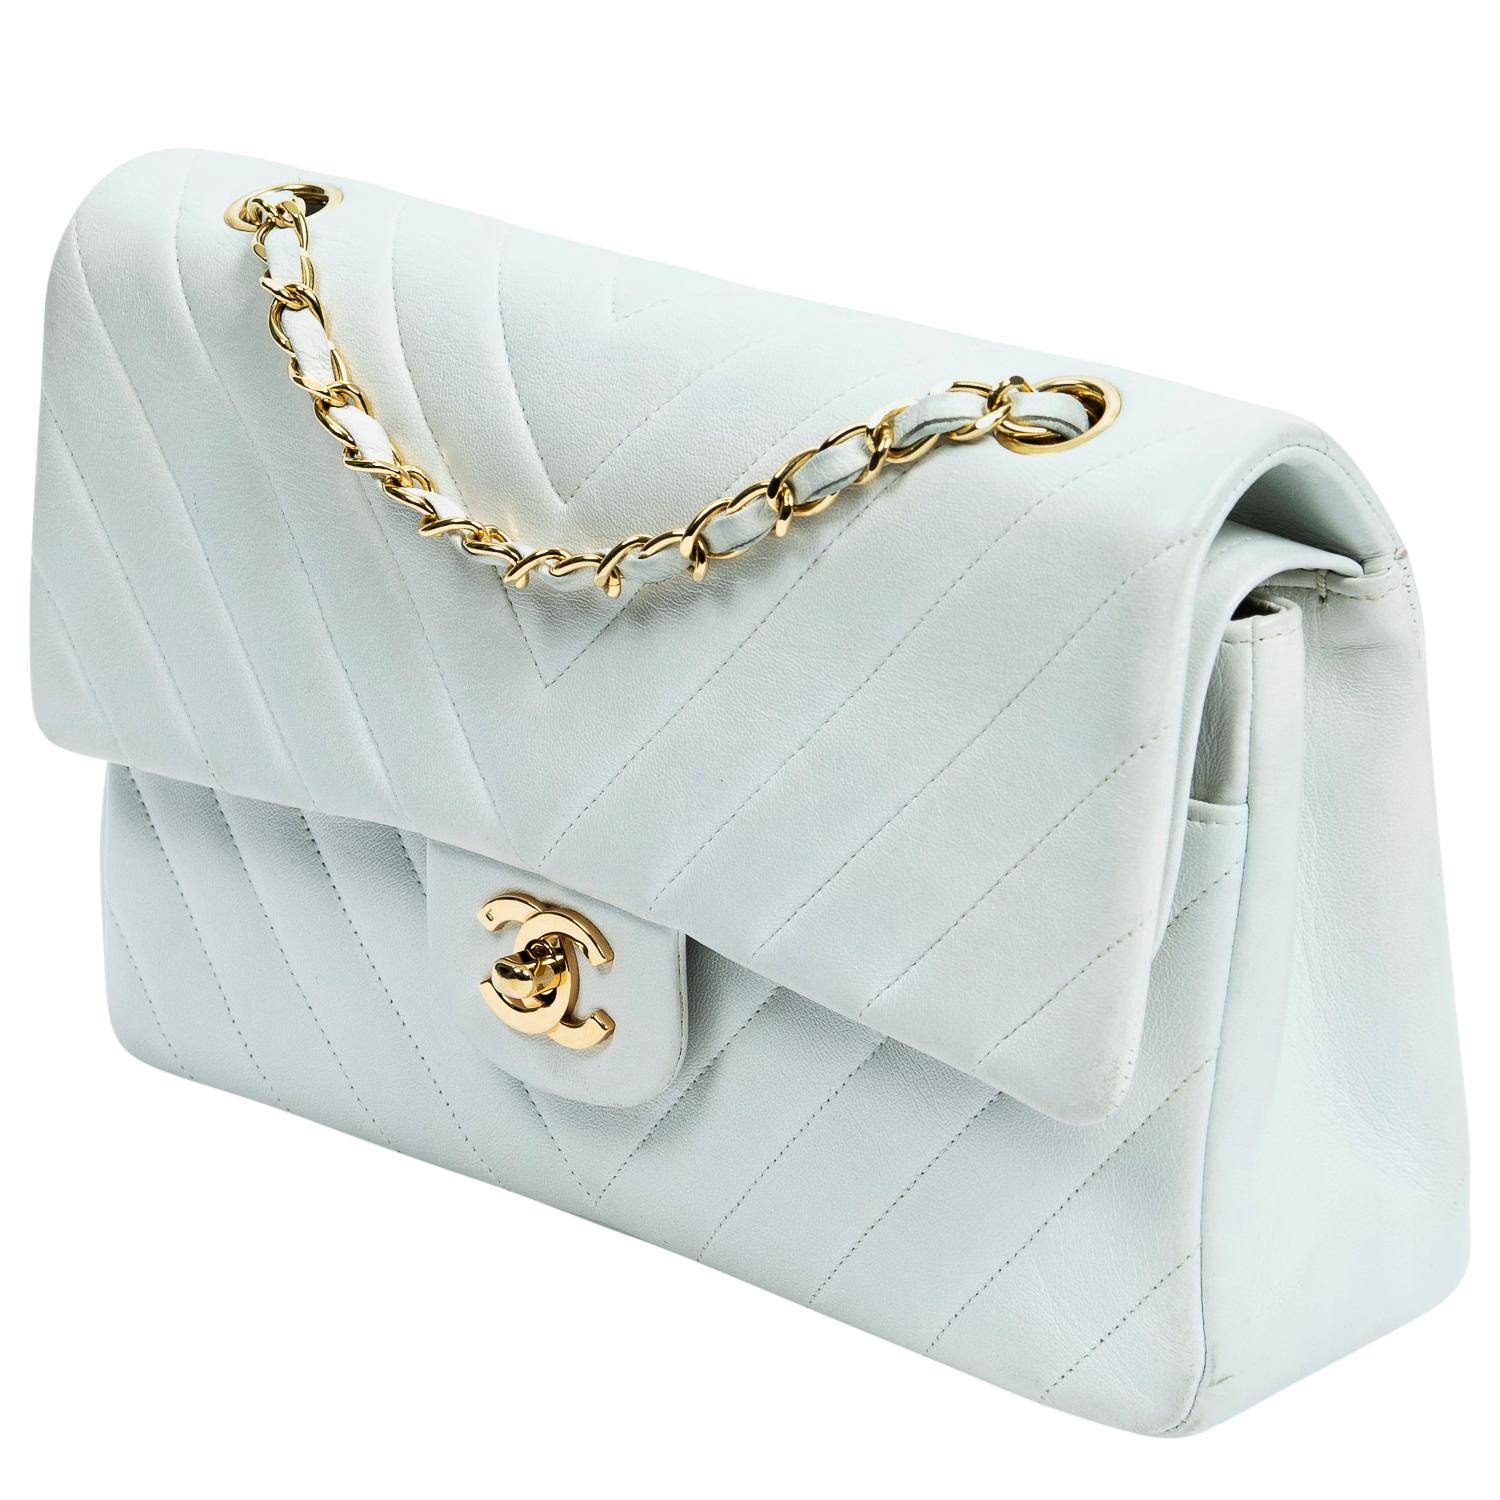 From the Spring/Summer 2015 Collection by Karl Lagerfild, this extremely coveted and rare beauty is crafted in white chevron lambskin leather, gold-tone hardware, a convertible chain link shoulder straps with a single exterior pocket. The CC